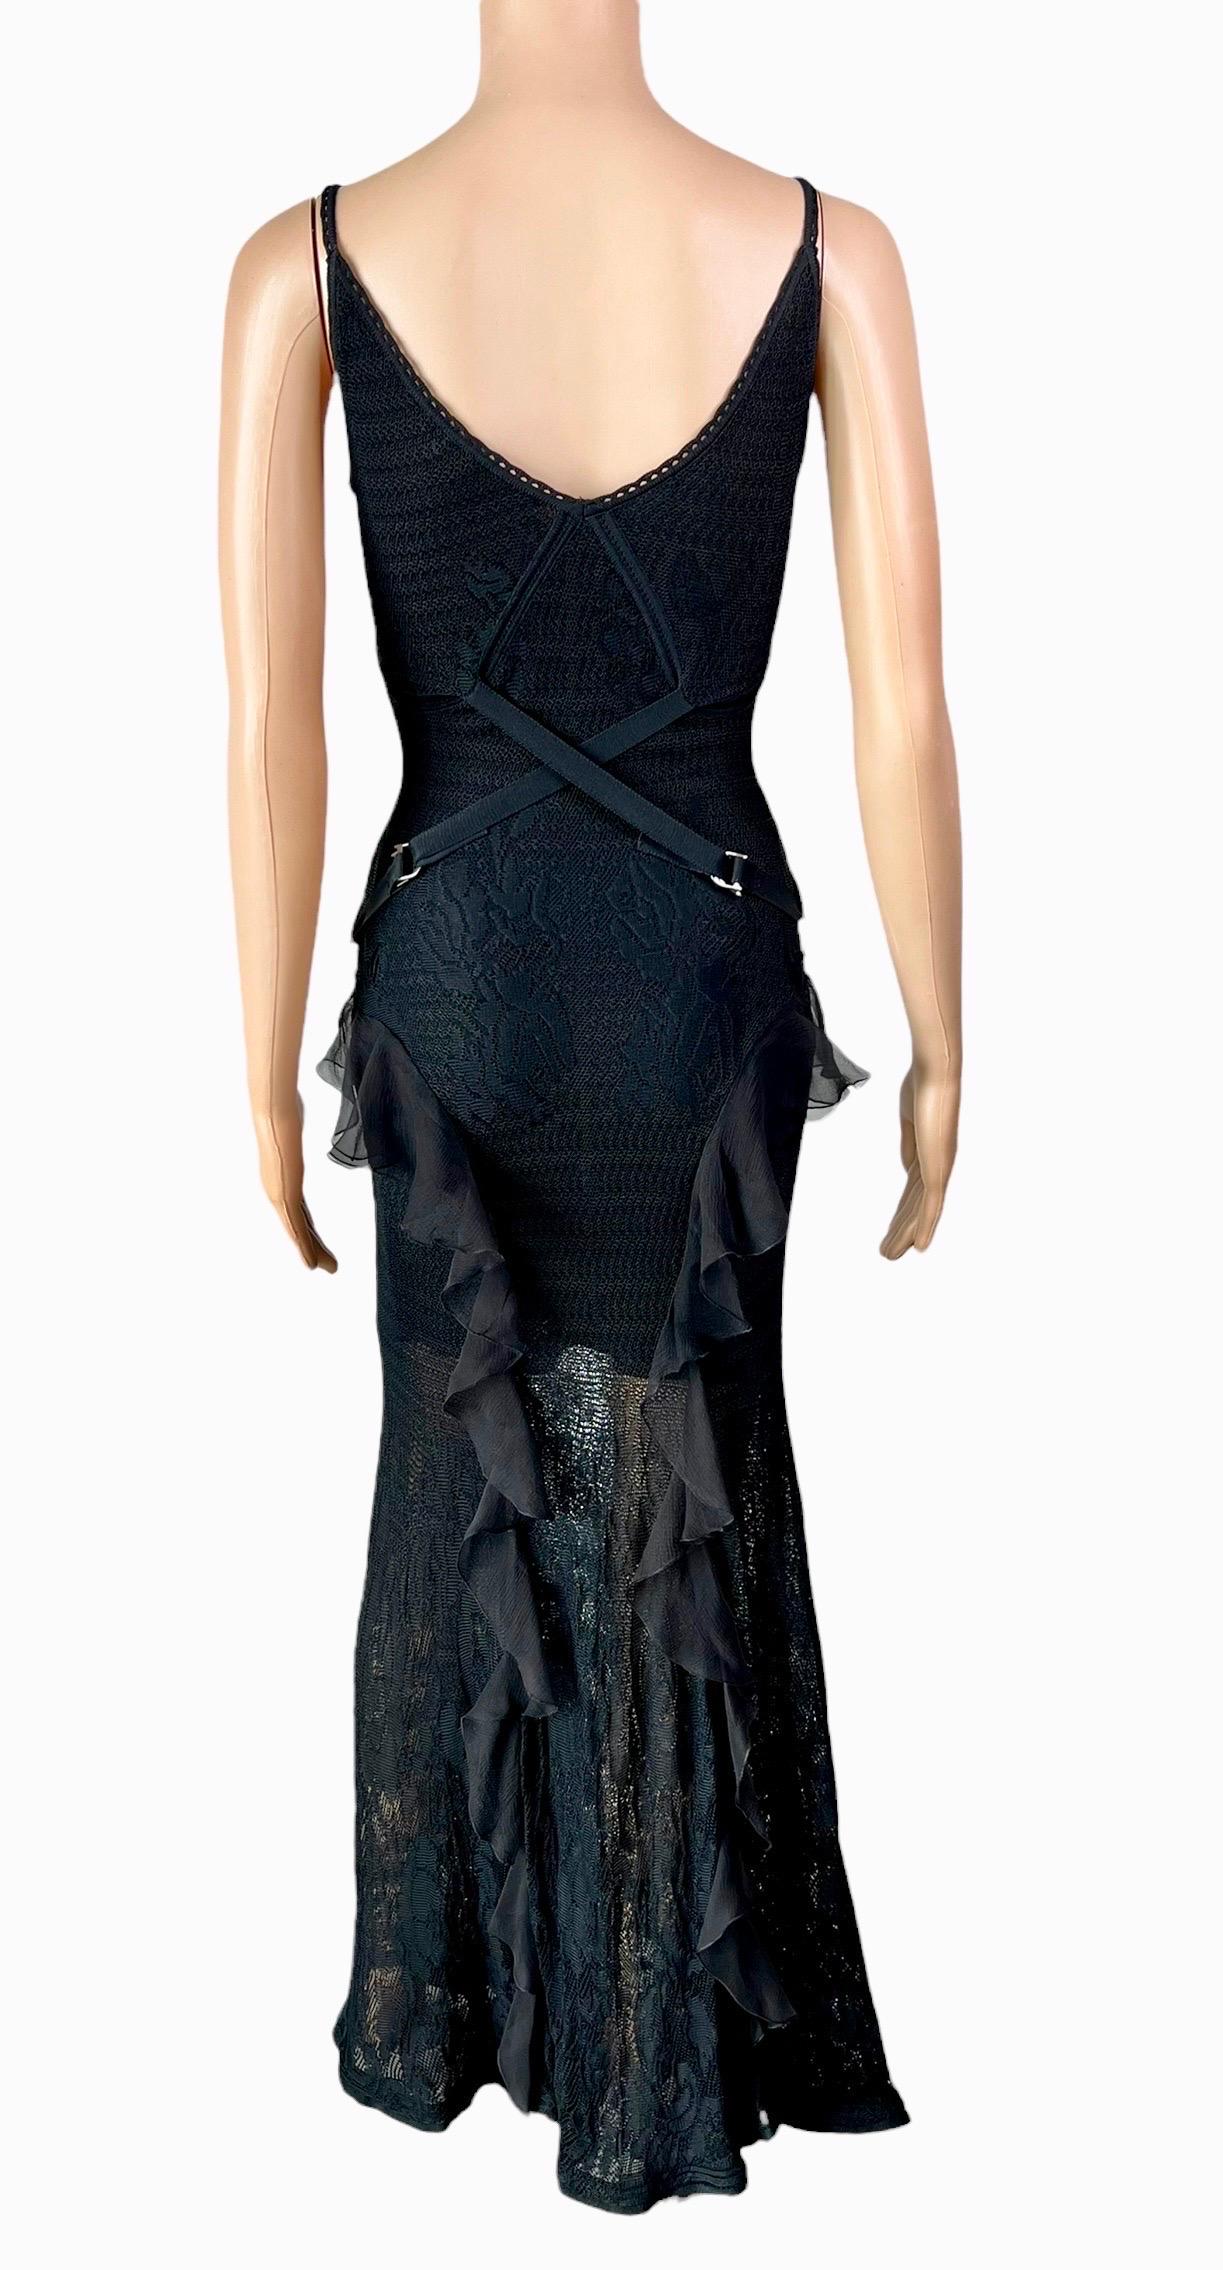 Christian Dior by John Galliano S/S2003 Sheer Lace Knit Black Evening Dress Gown For Sale 3